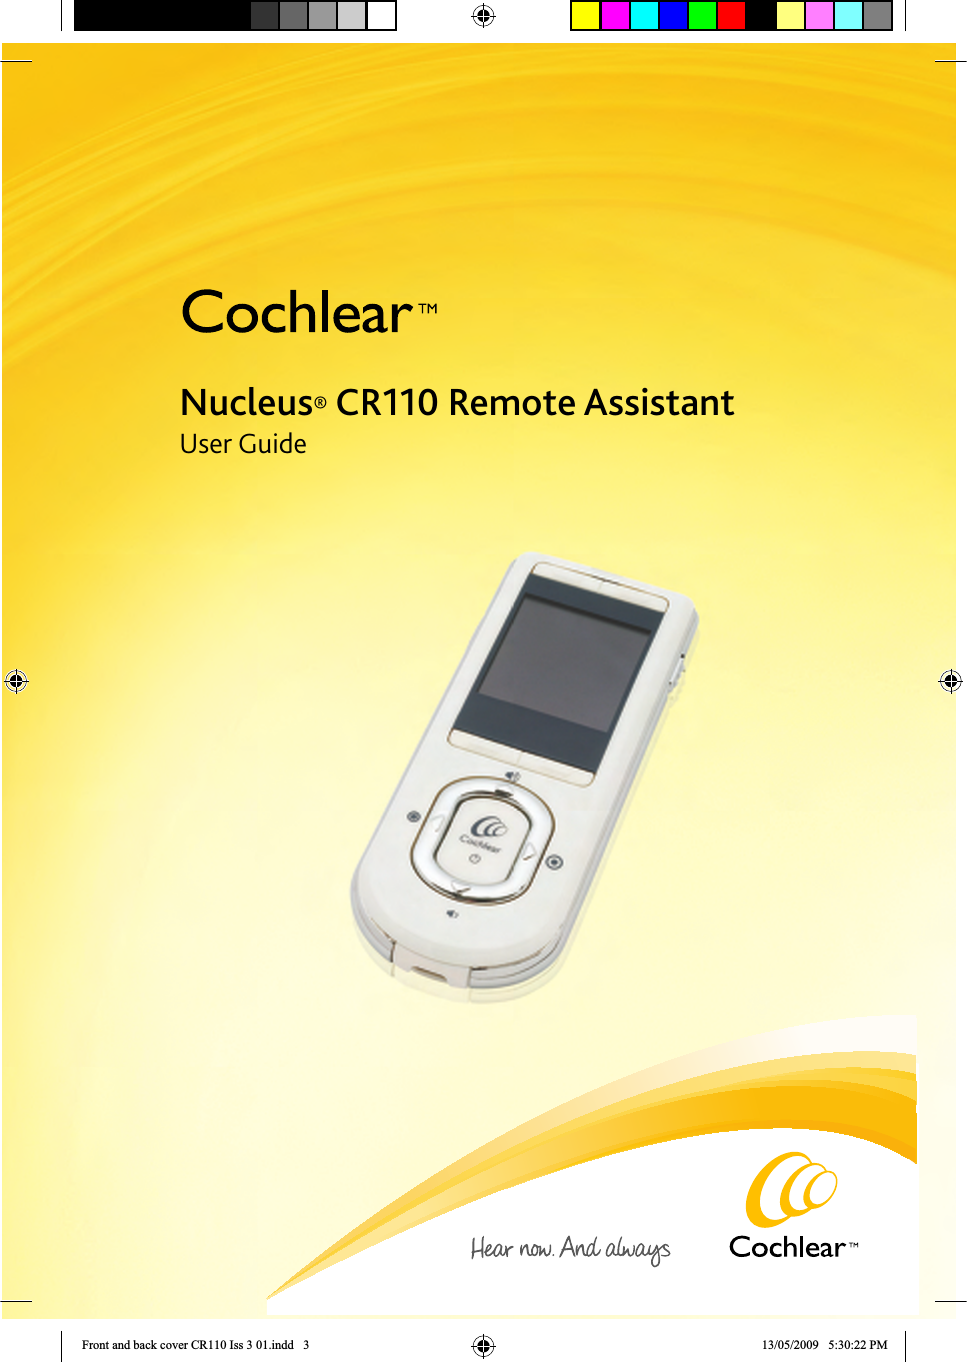 Nucleus® CR110 Remote AssistantUser GuideFront and back cover CR110 Iss 3 01.indd   3 13/05/2009   5:30:22 PM